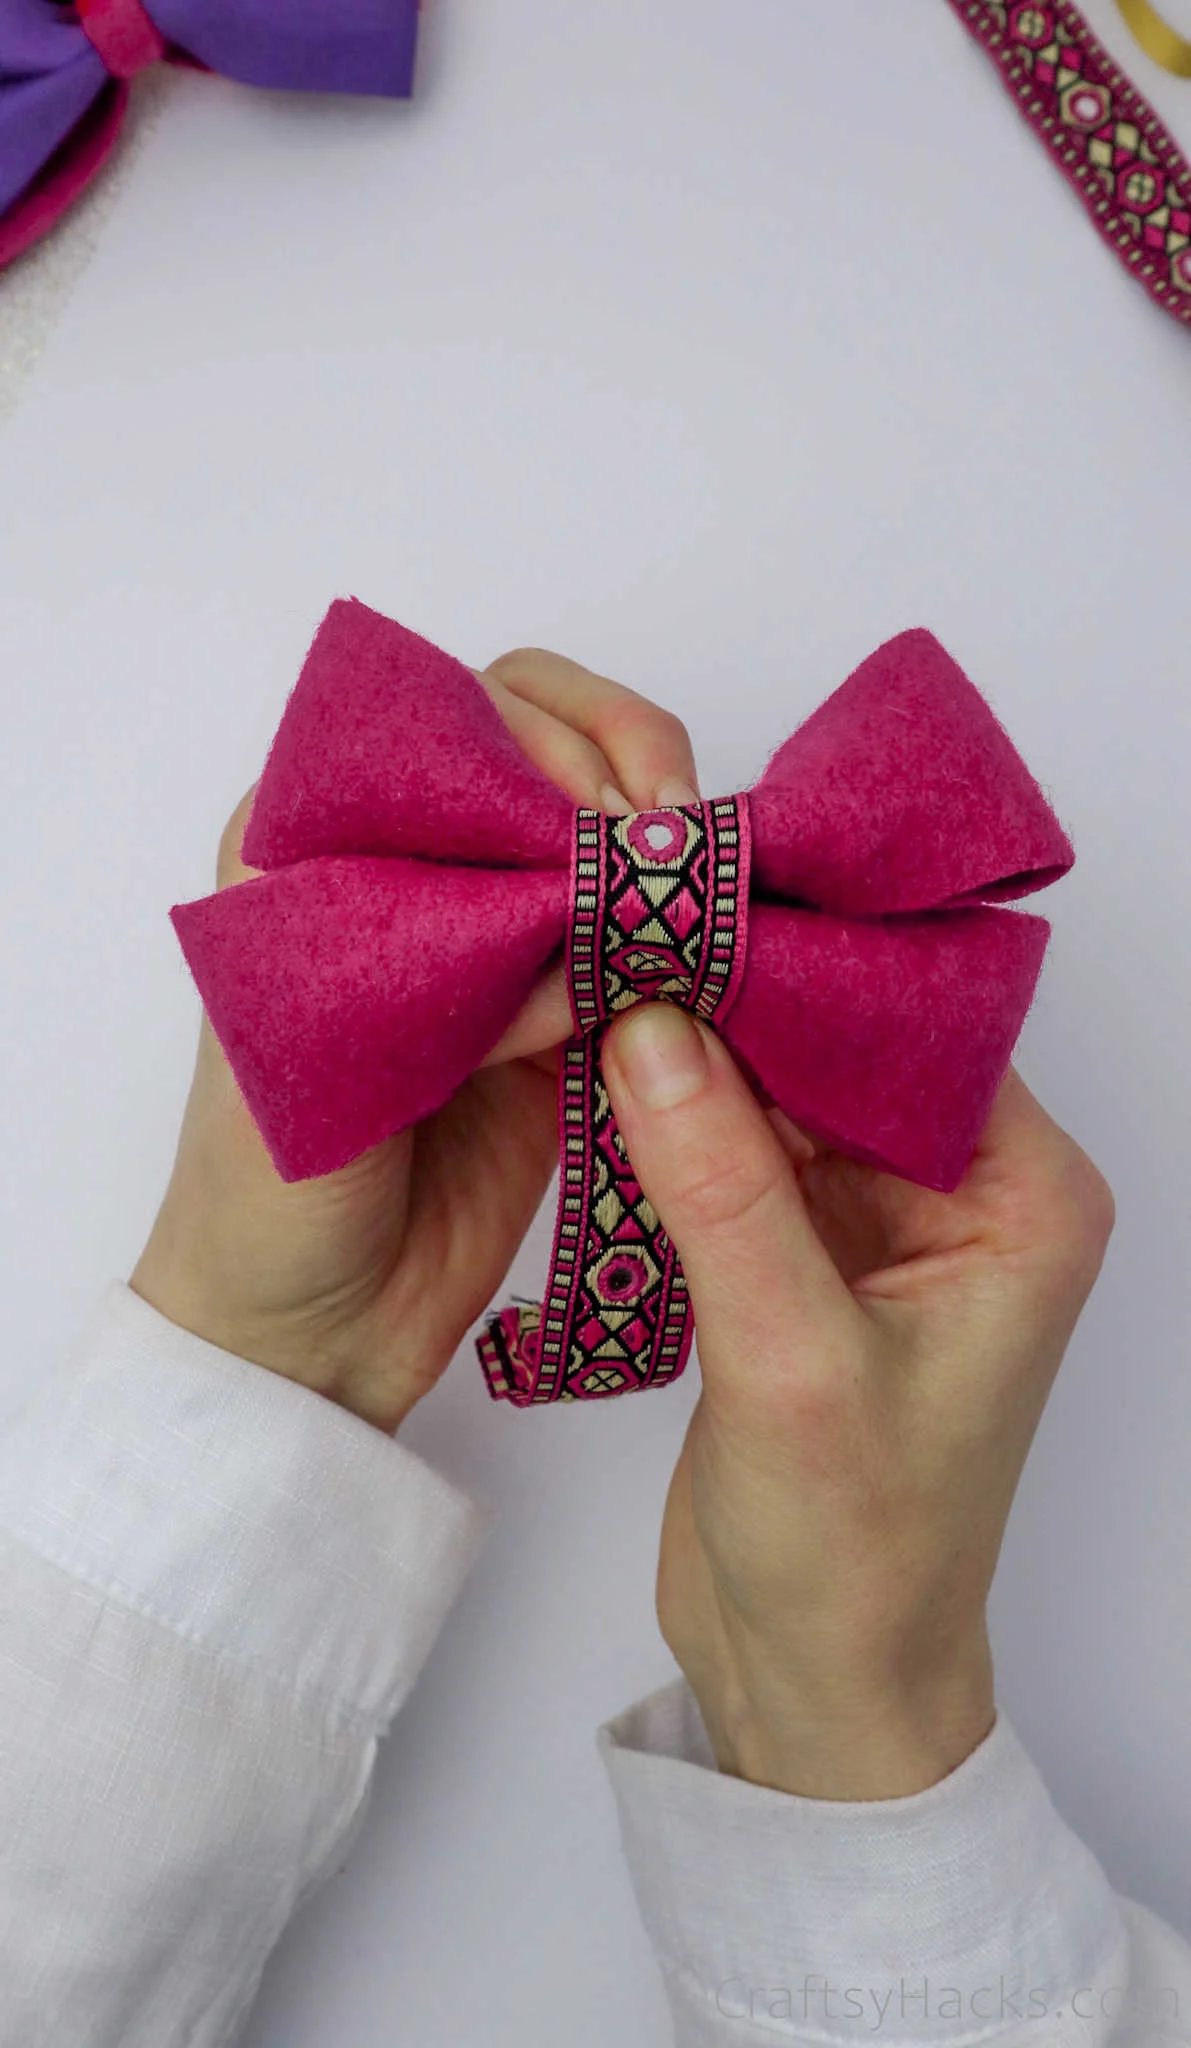 How to Make Hair Bows (Step-by-Step Tutorial) - Craftsy Hacks